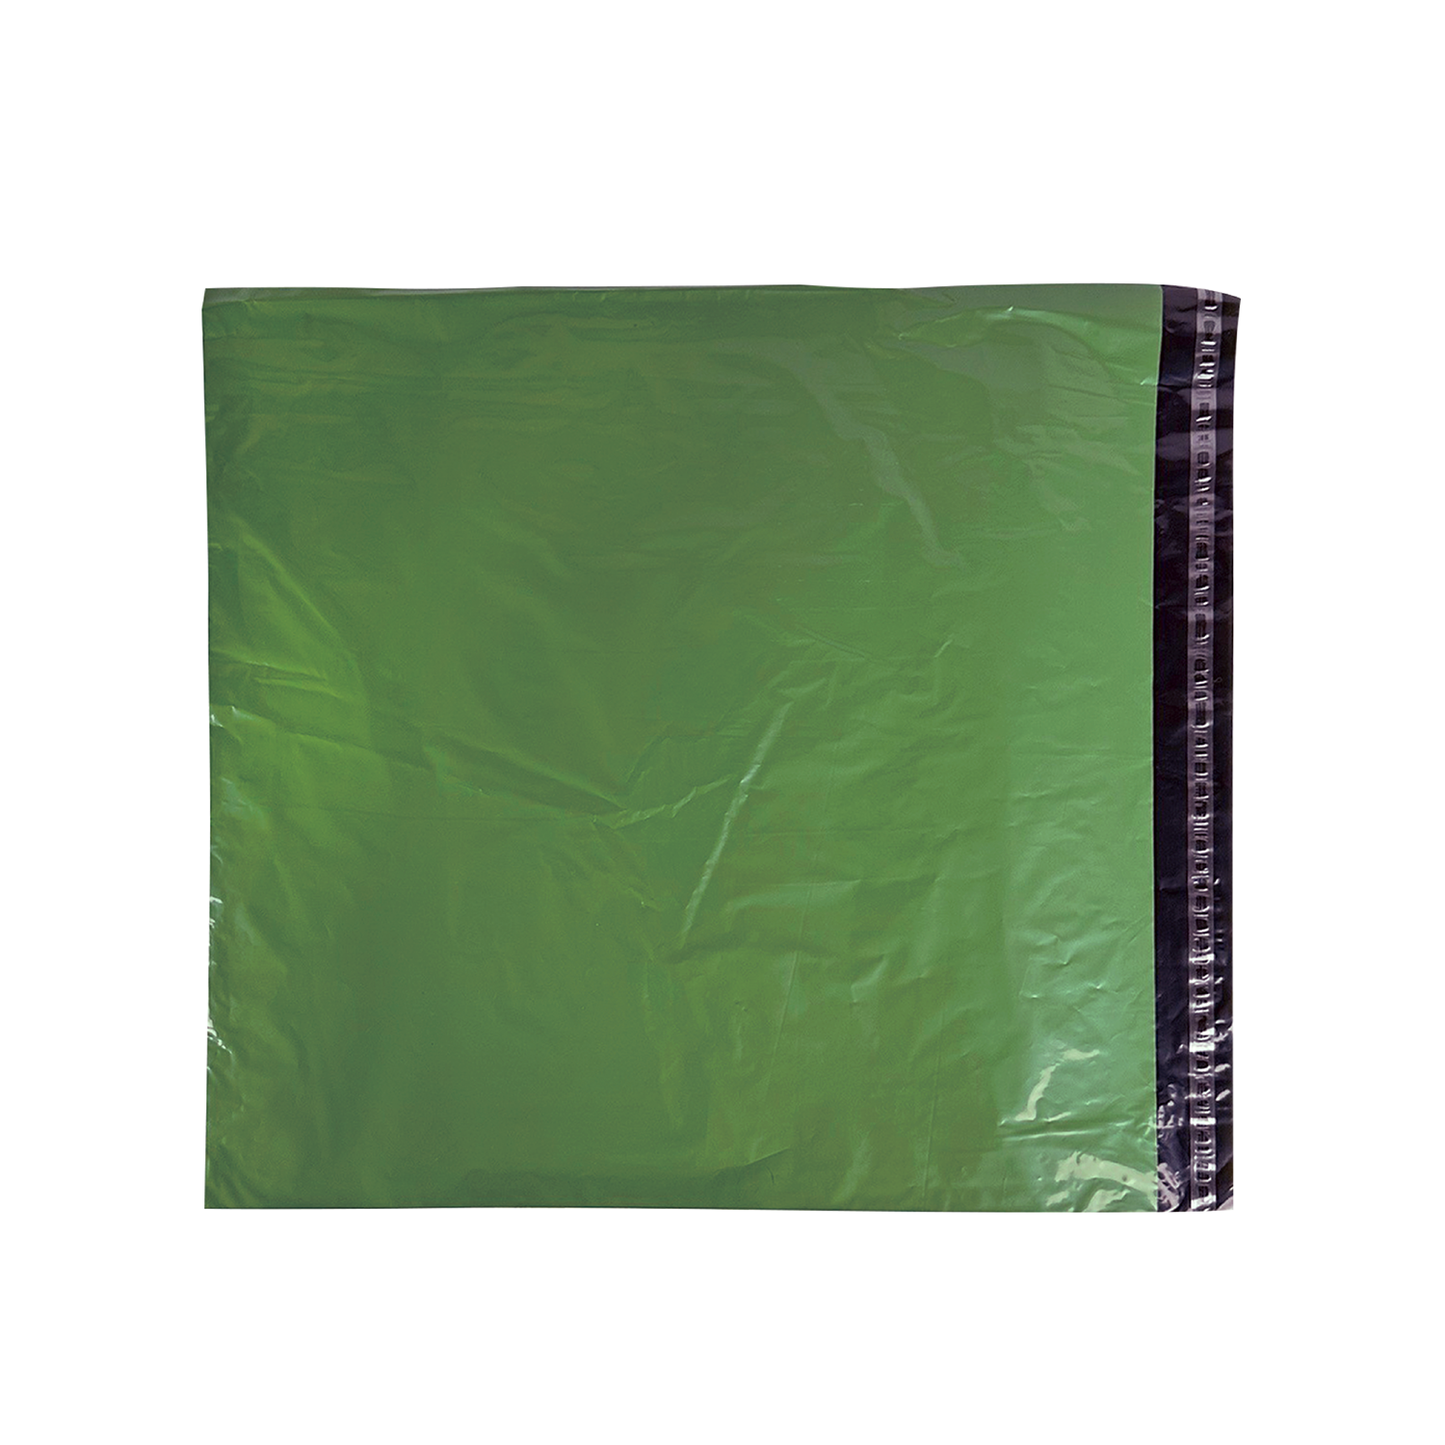 Owlpack Eco Friendly Recycled Mailers( Green, Size 12x15.5, 24x24)